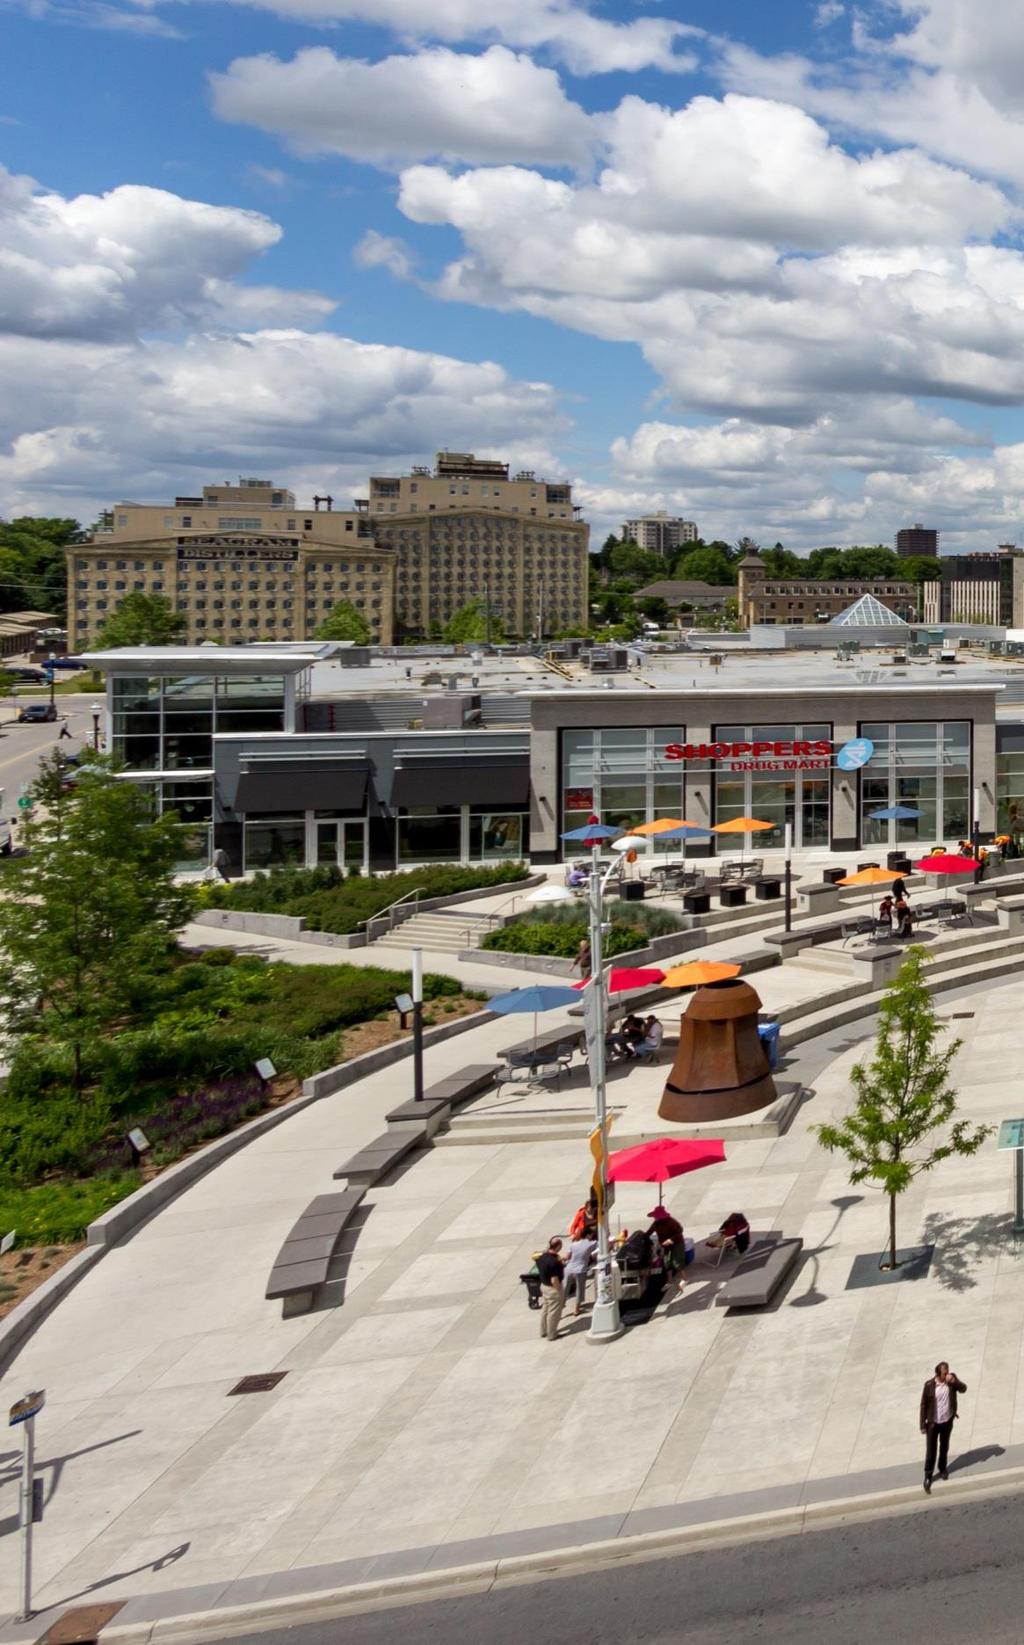 WATERLOO REGION MARKET OVERVIEW Incorporating the cities of Kitchener, Waterloo and Cambridge, the Waterloo Region comprises approximately 563,000 residents, making it the seventh largest census